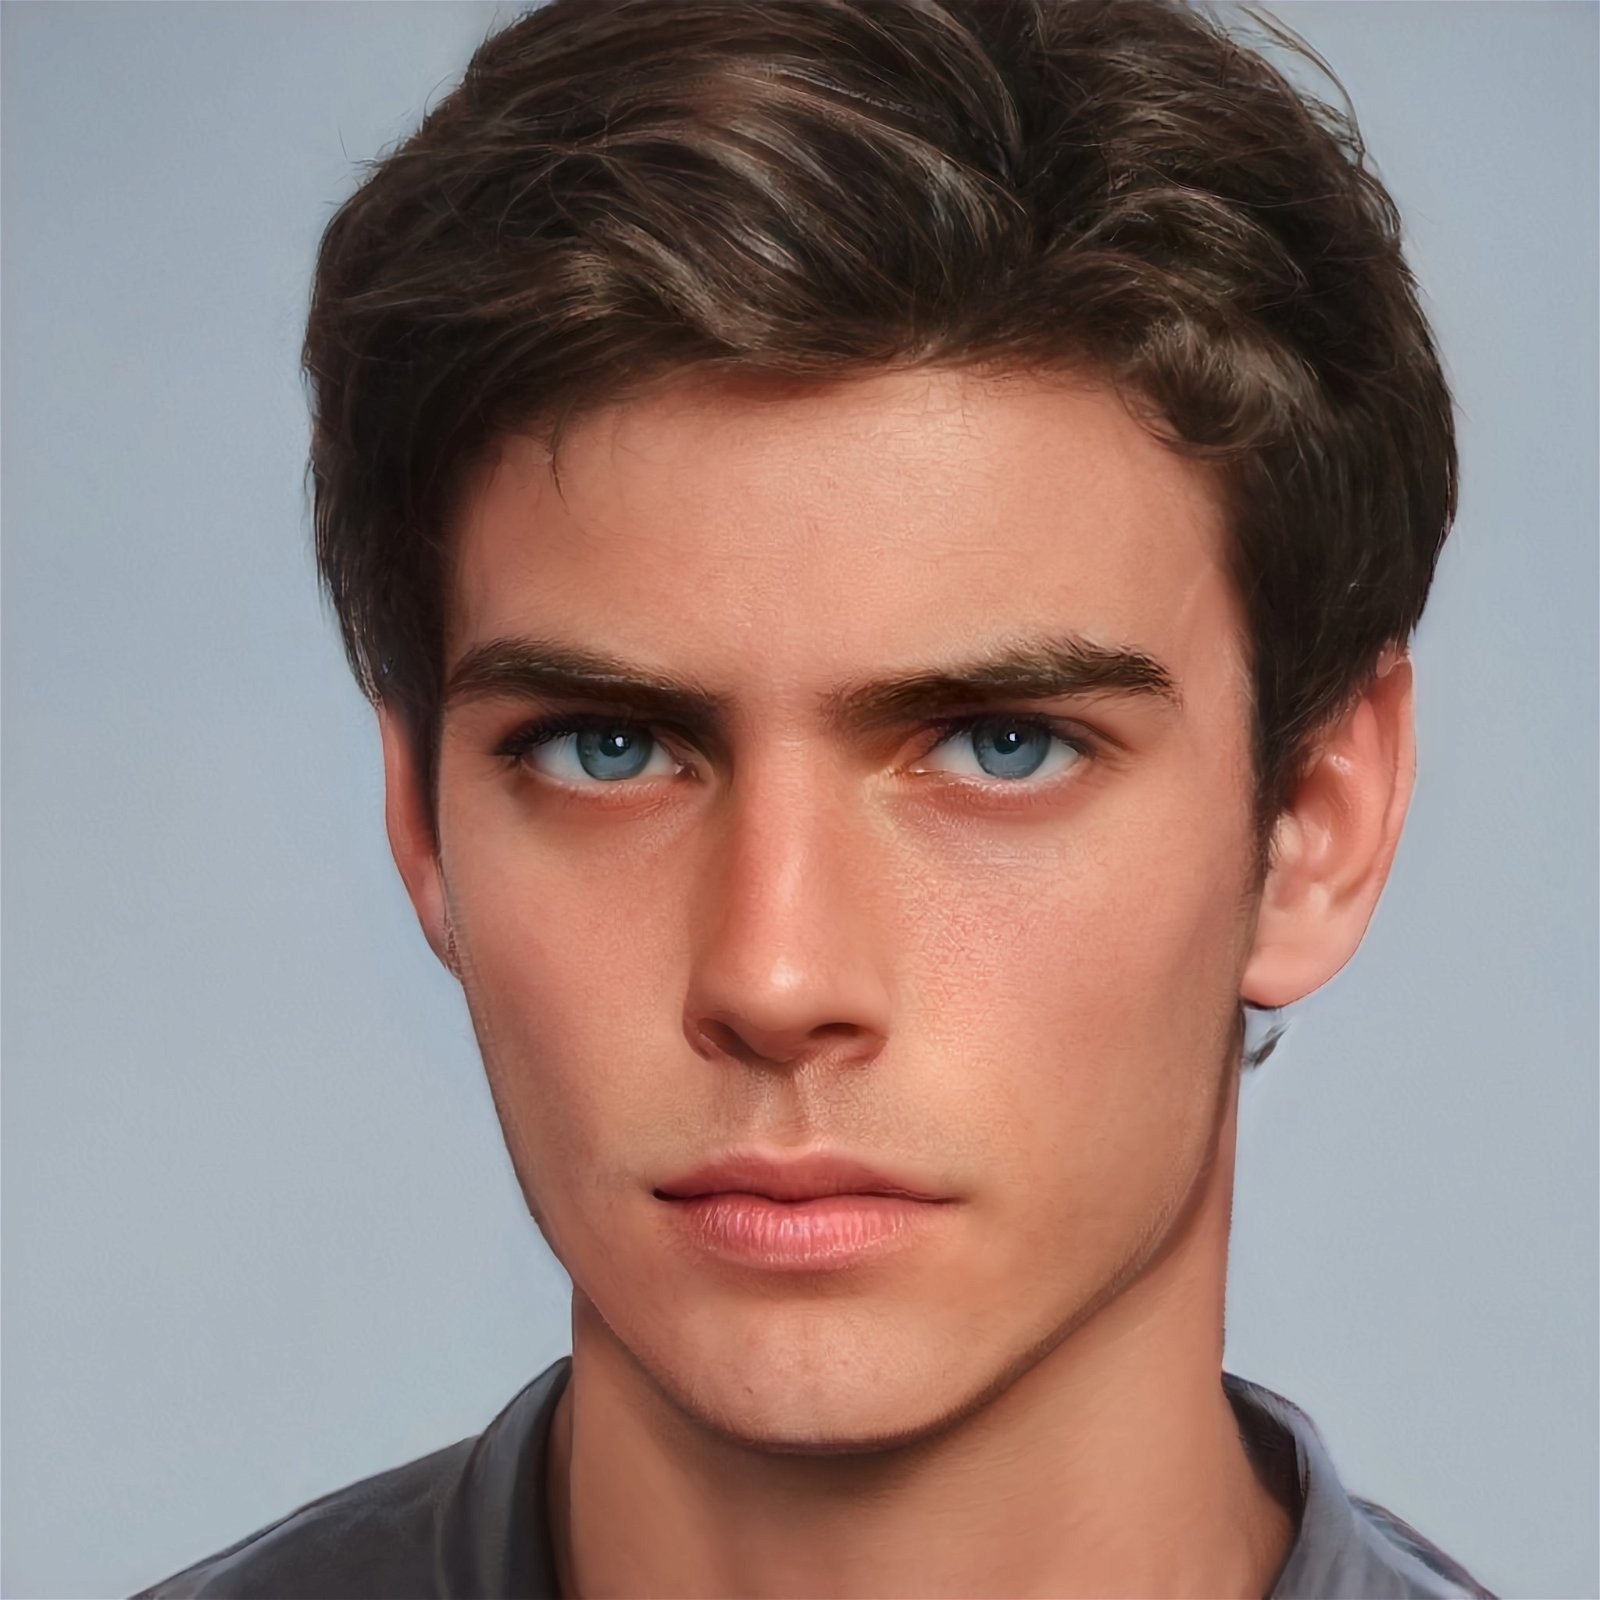 character with dark brown hair and blue eyes